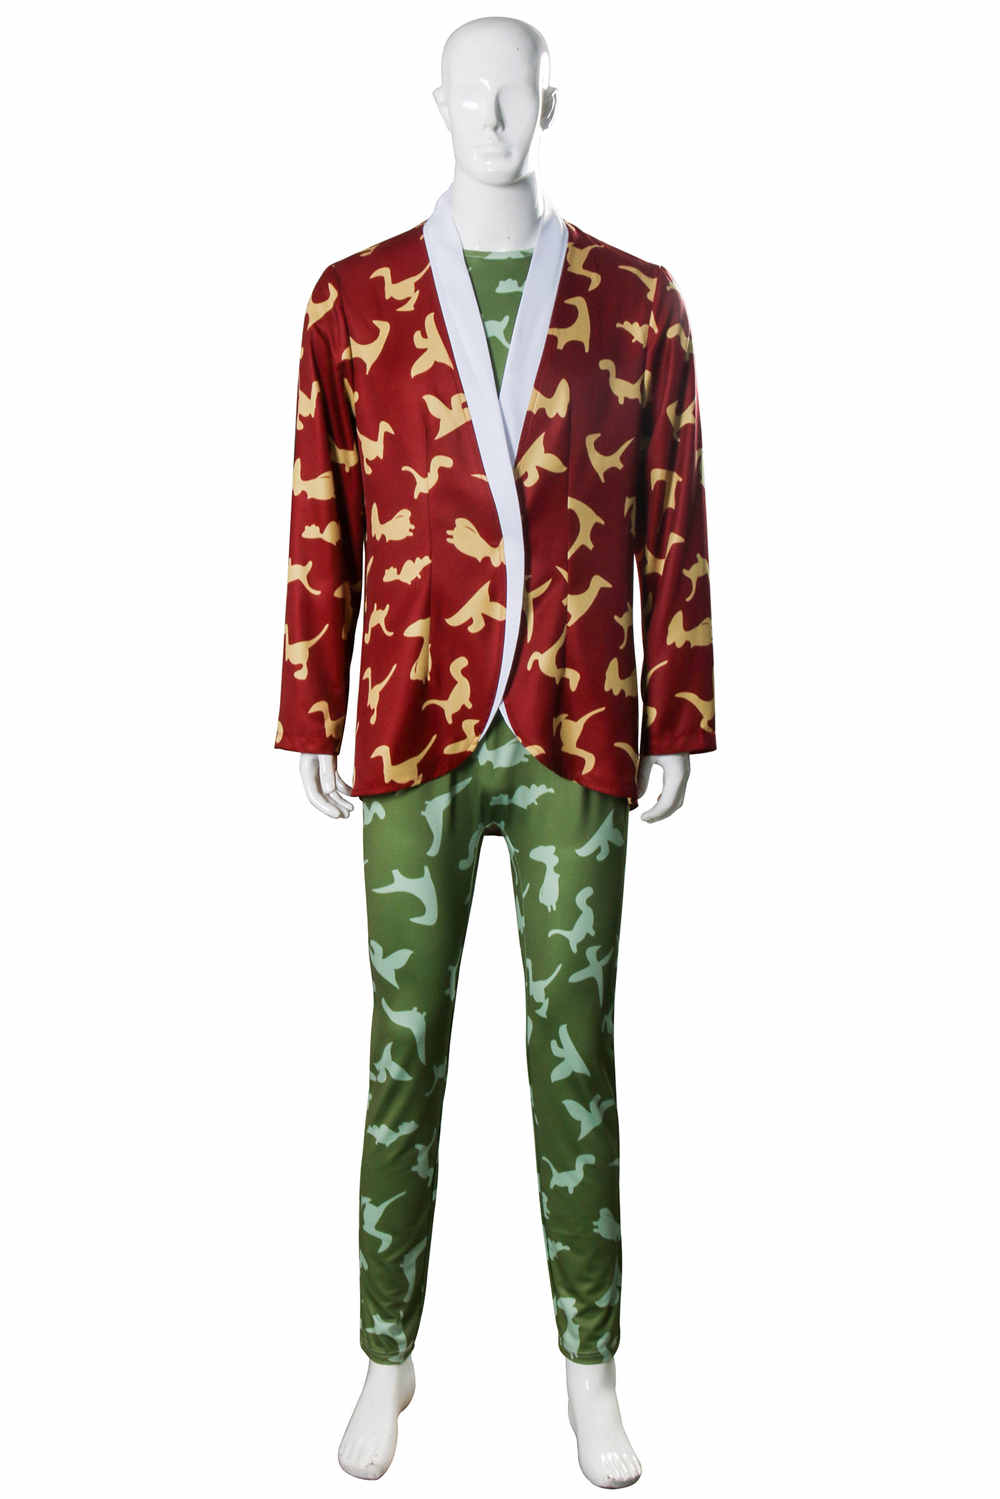 The Christmasaurus William Trundle Jumpsuit Cosplay Costume Christmas Gifts Parent-Child Outfit Adult Kids